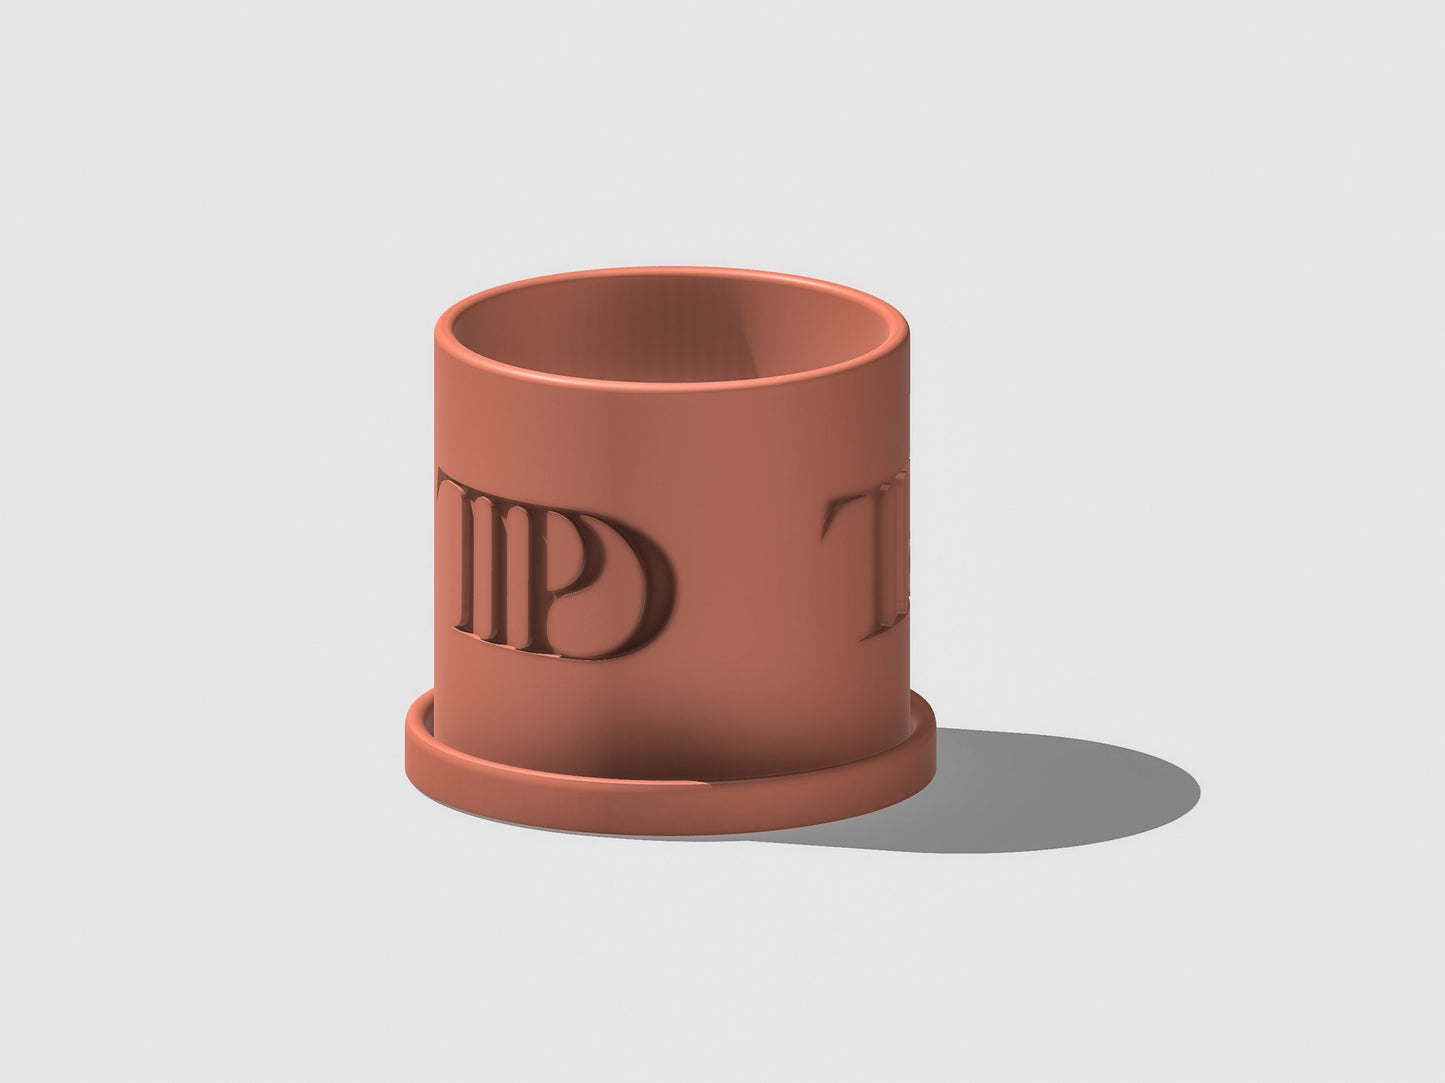 Taylor Swift Plant Pot With Drainage, TTPD Merch Decor, 3D Printed Planter, Gifts for Swifties, Tortured Poets Department Home Decor